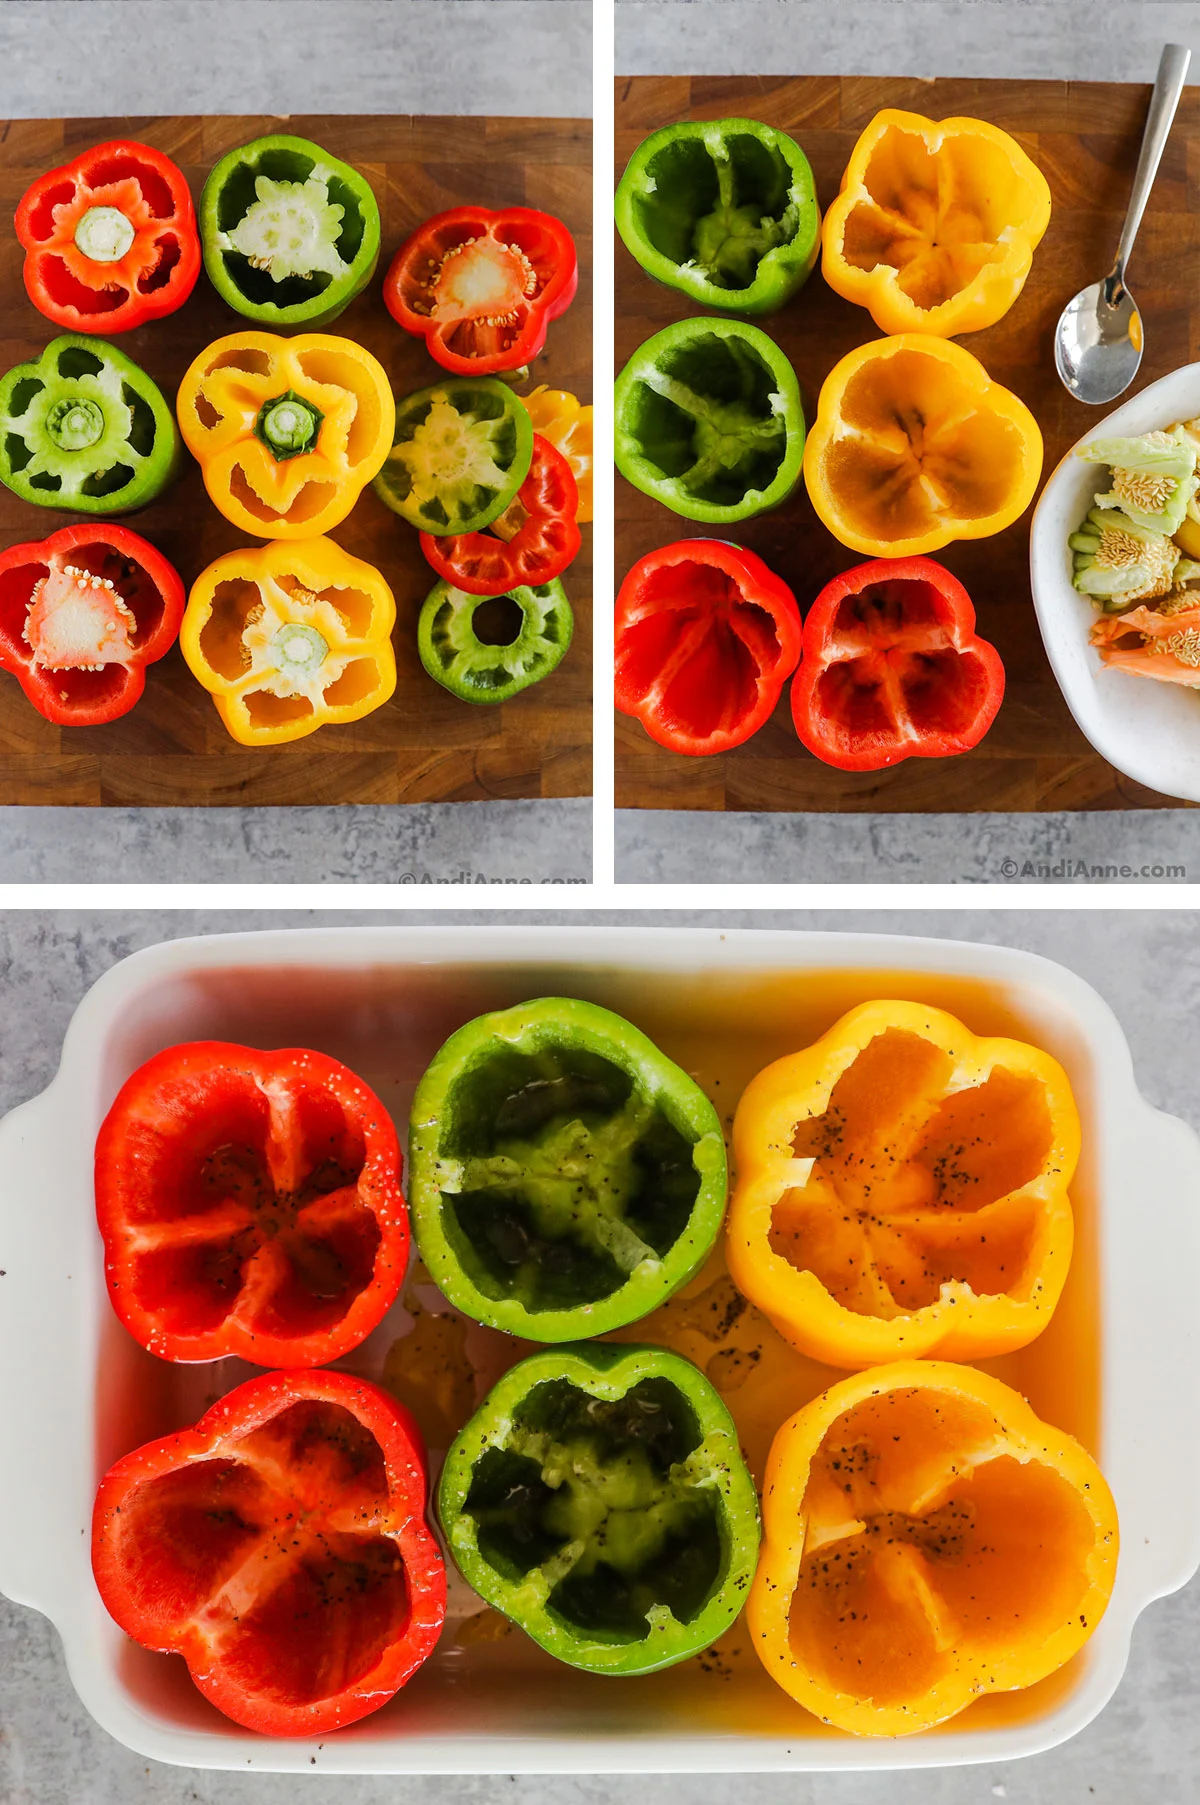 Three images of sliced bell peppers with the innner seeds scooped out.